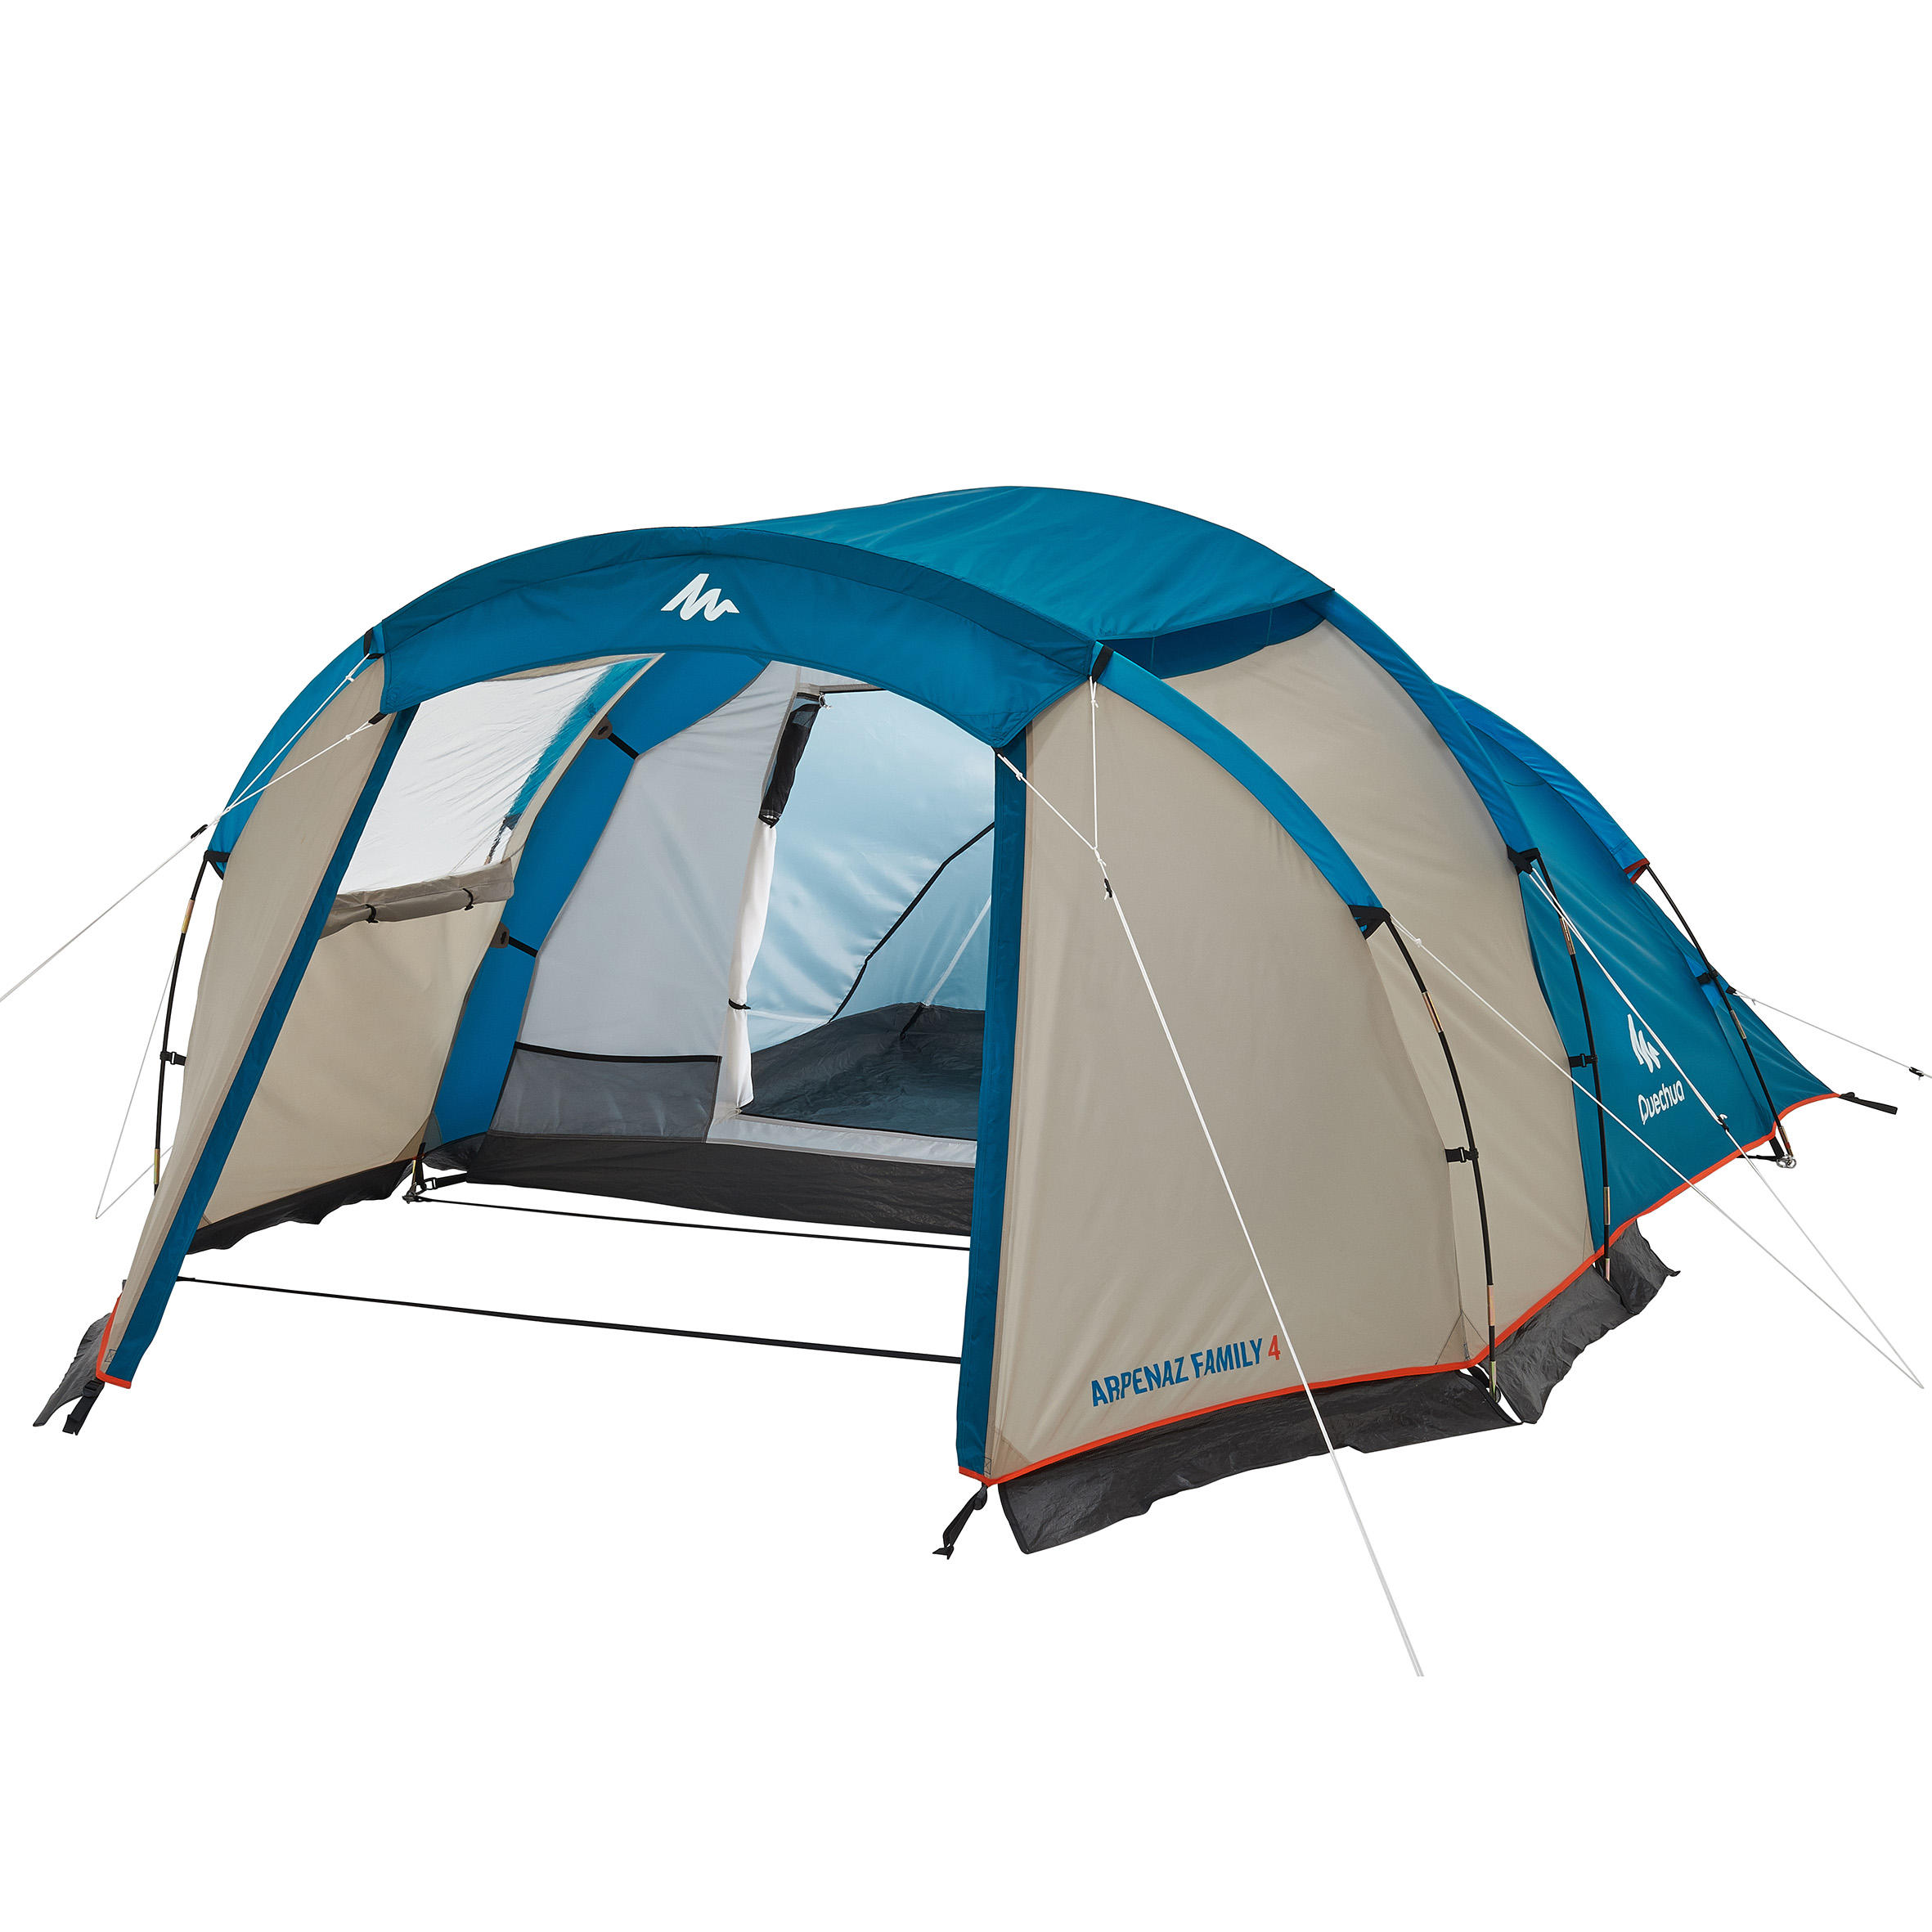 Hiking Tents Online In India|Arpenaz 4 